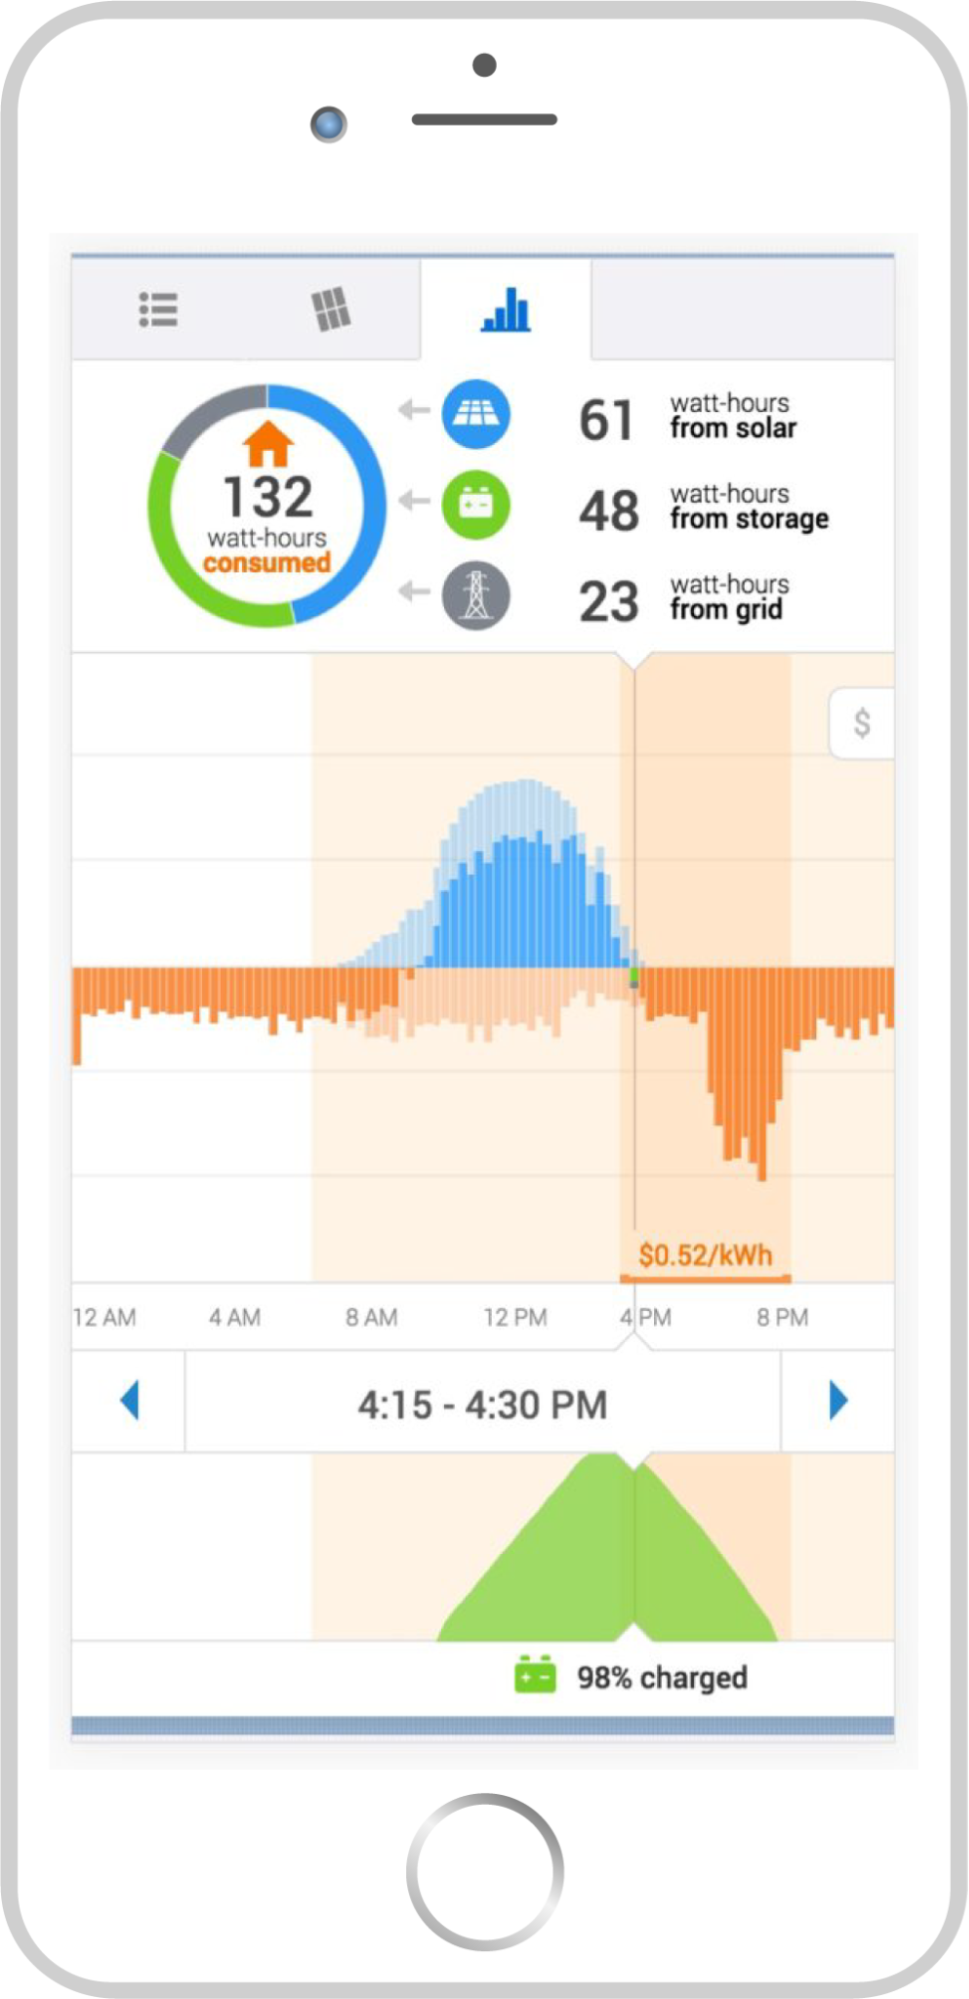 Performance monitoring system for solar.